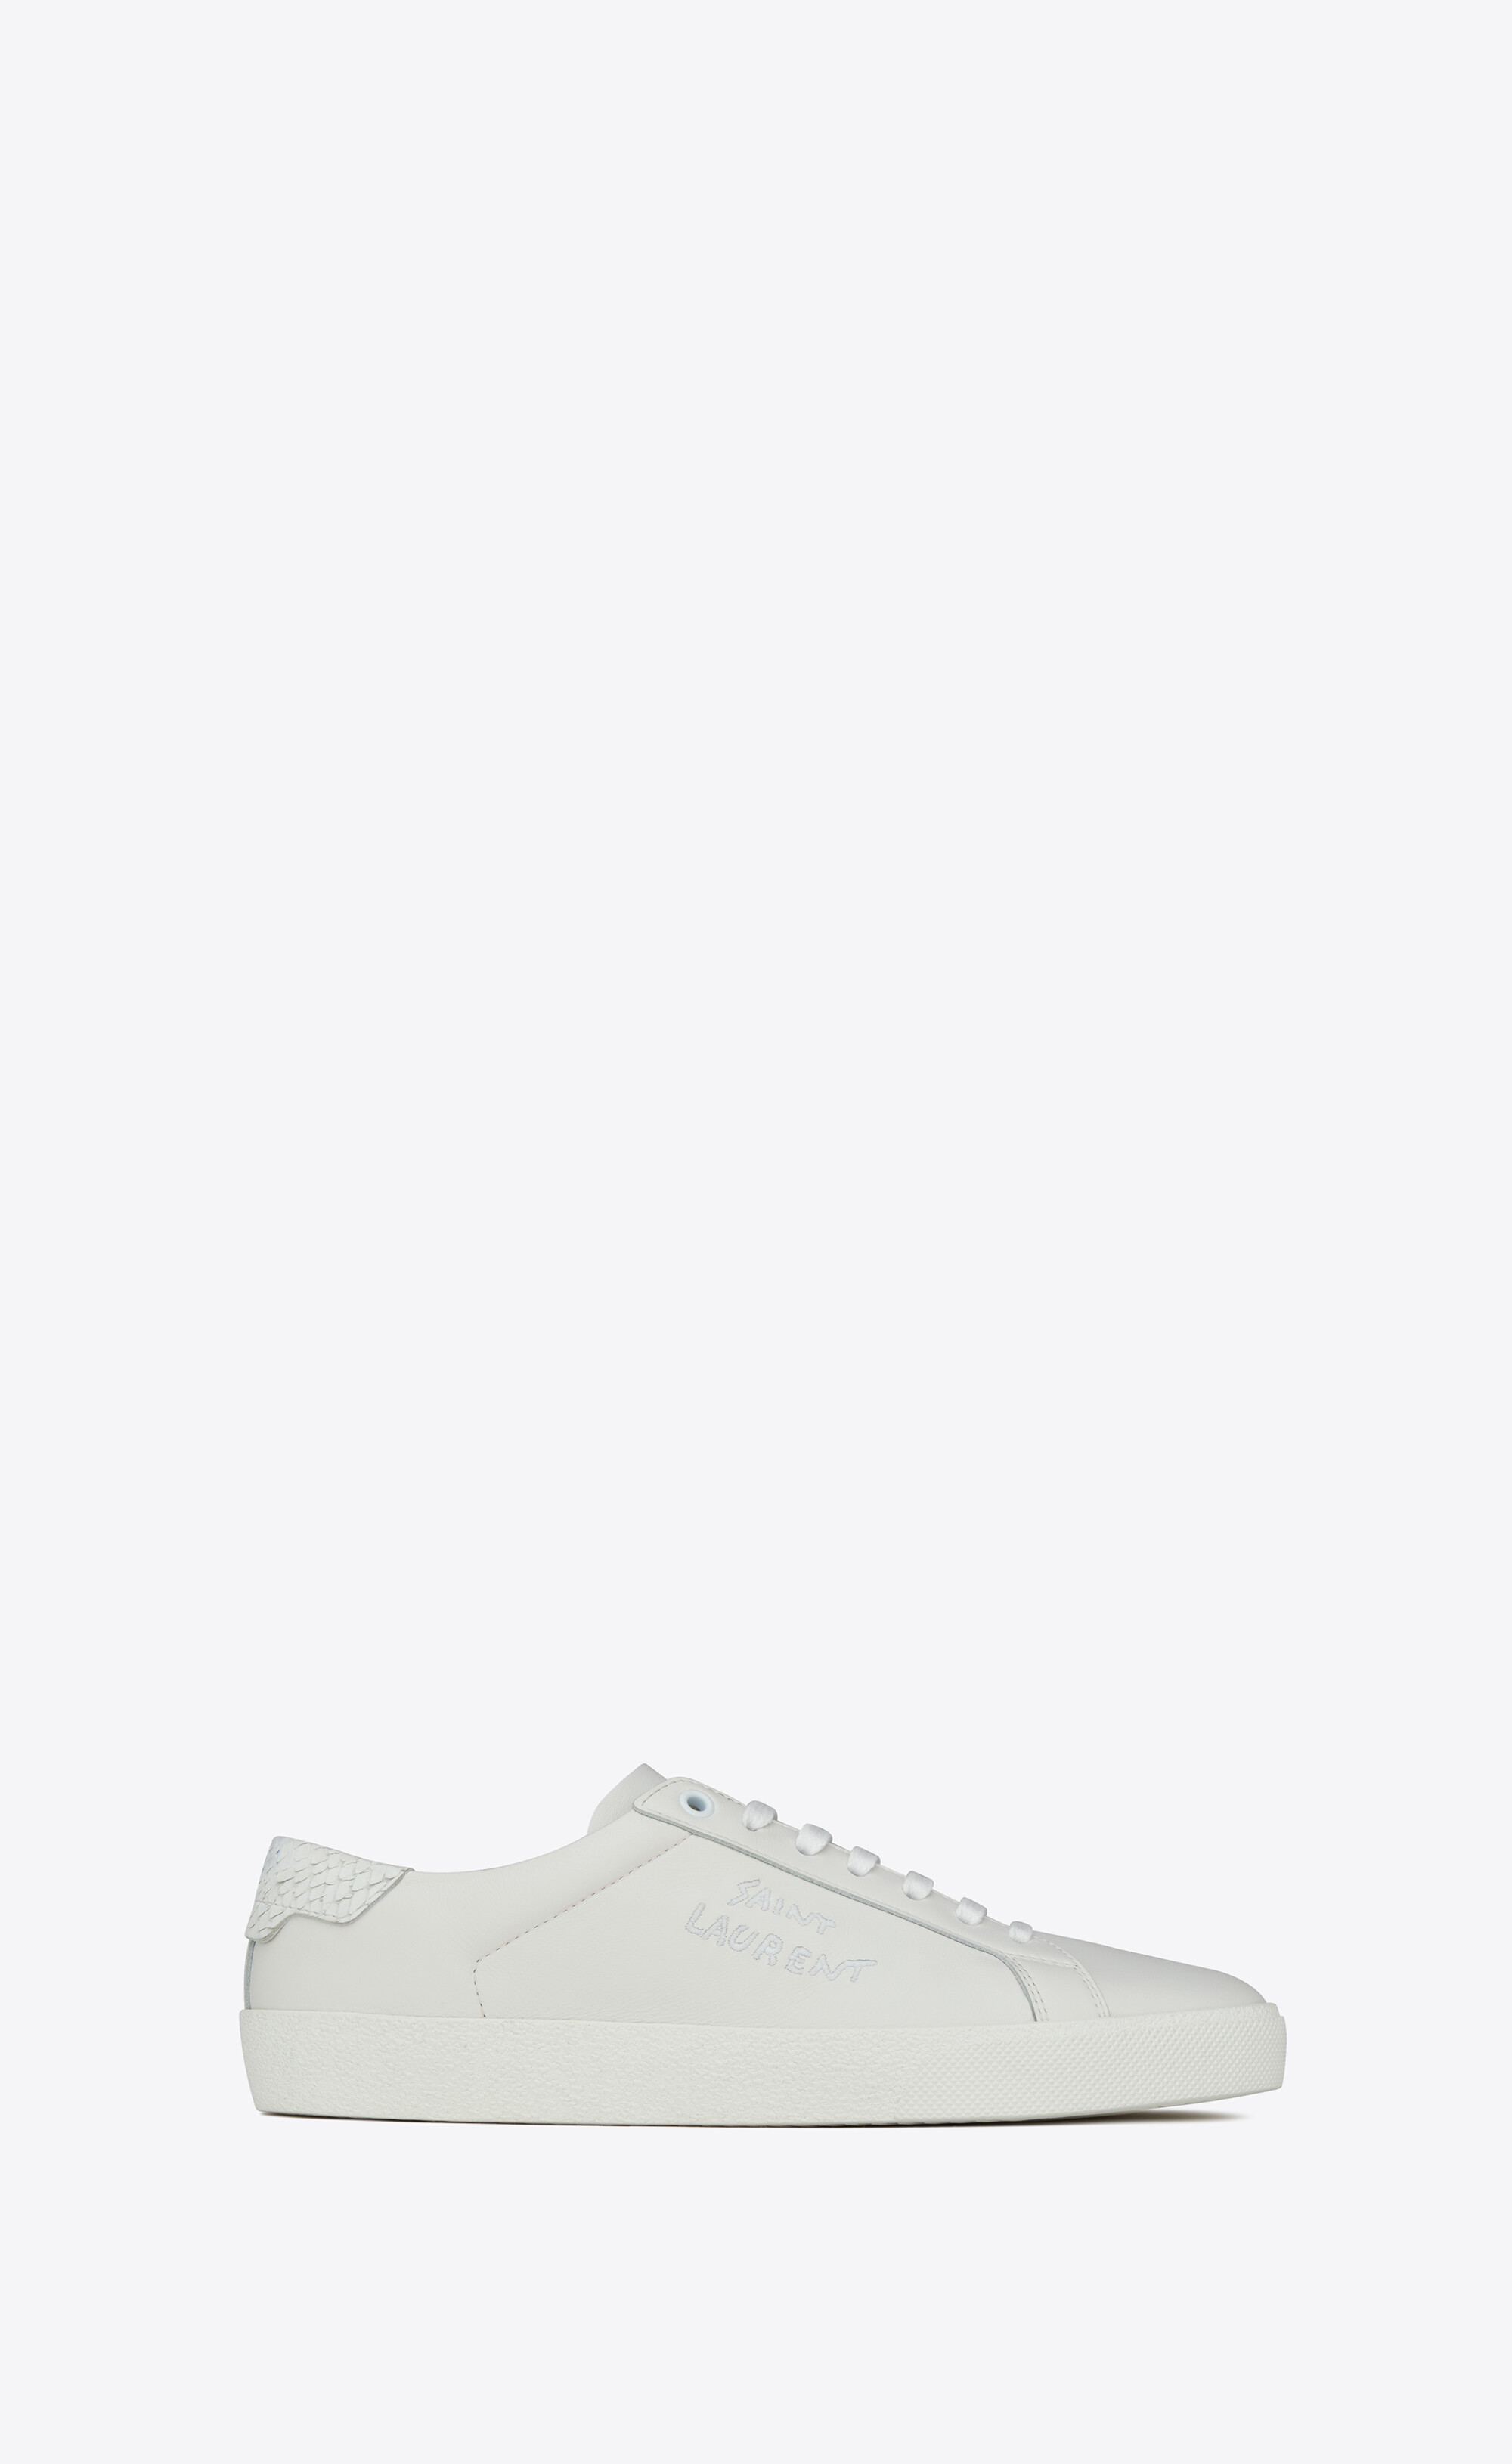 Court classic sl/06 embroidered sneakers in smooth leather and 